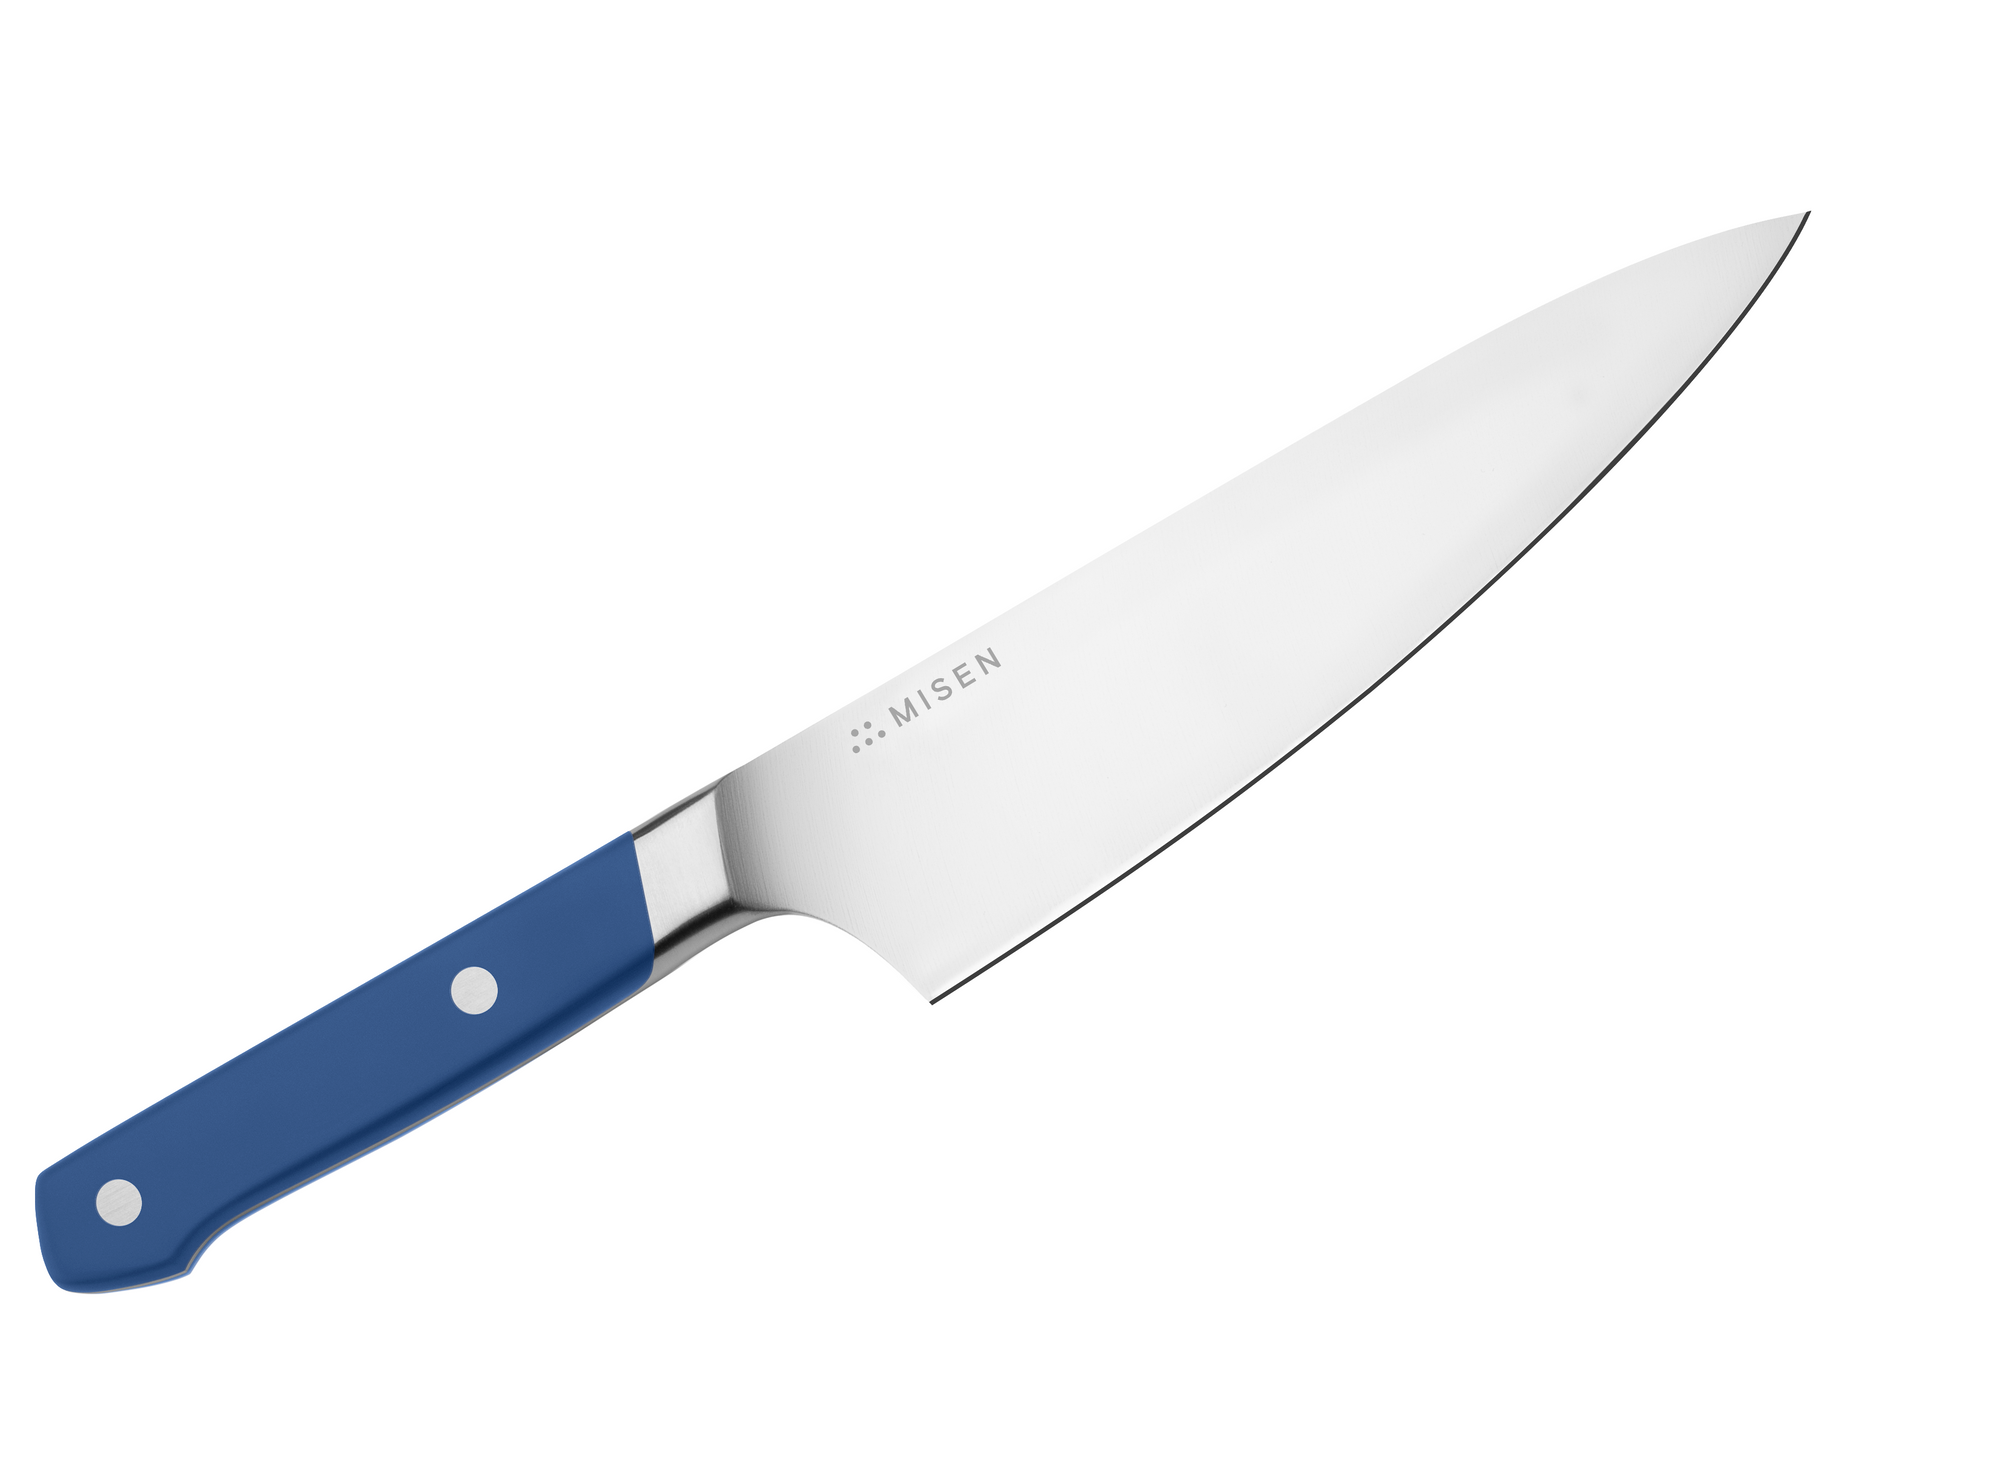 6.5" Chef’s Knife